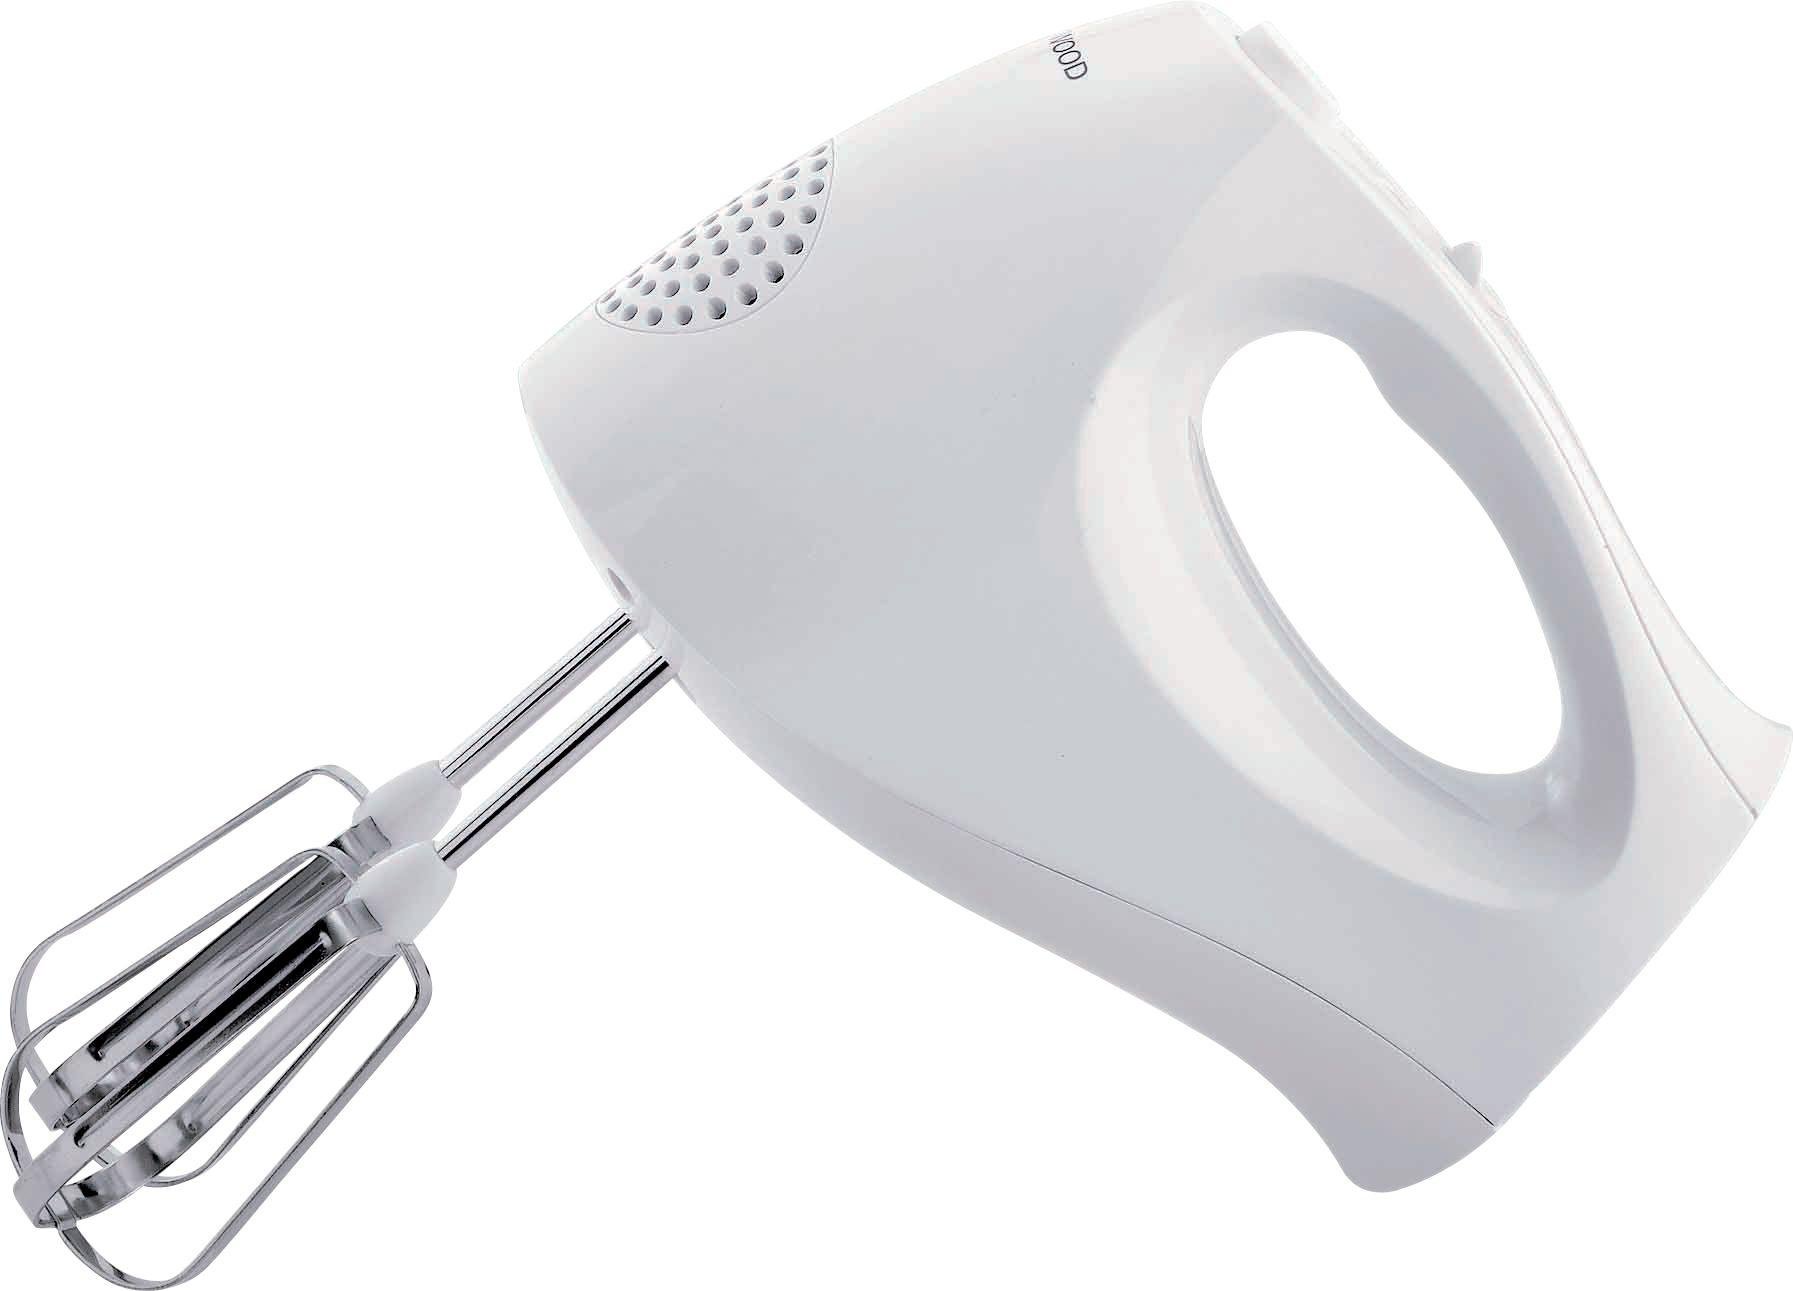 Kenwood HM220 Electric Hand Mixer Review